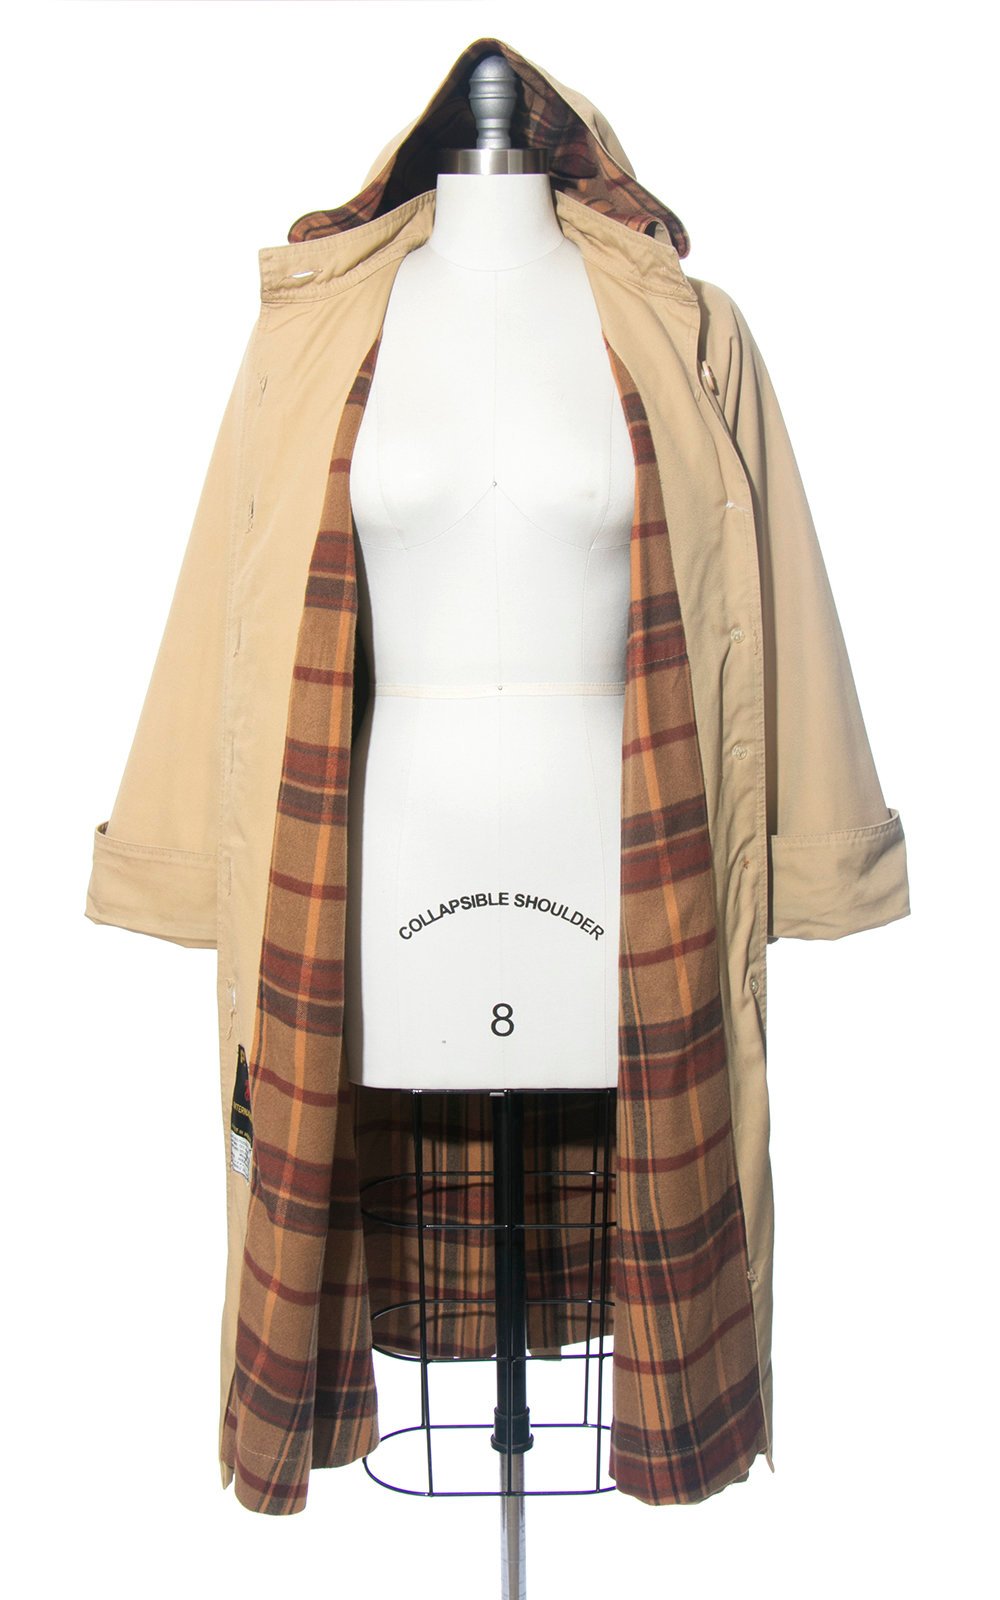 Vintage 1970s Trench Coat | 70s Hooded Plaid Flannel Lined Tan Camel Belted Rain Jacket (medium)